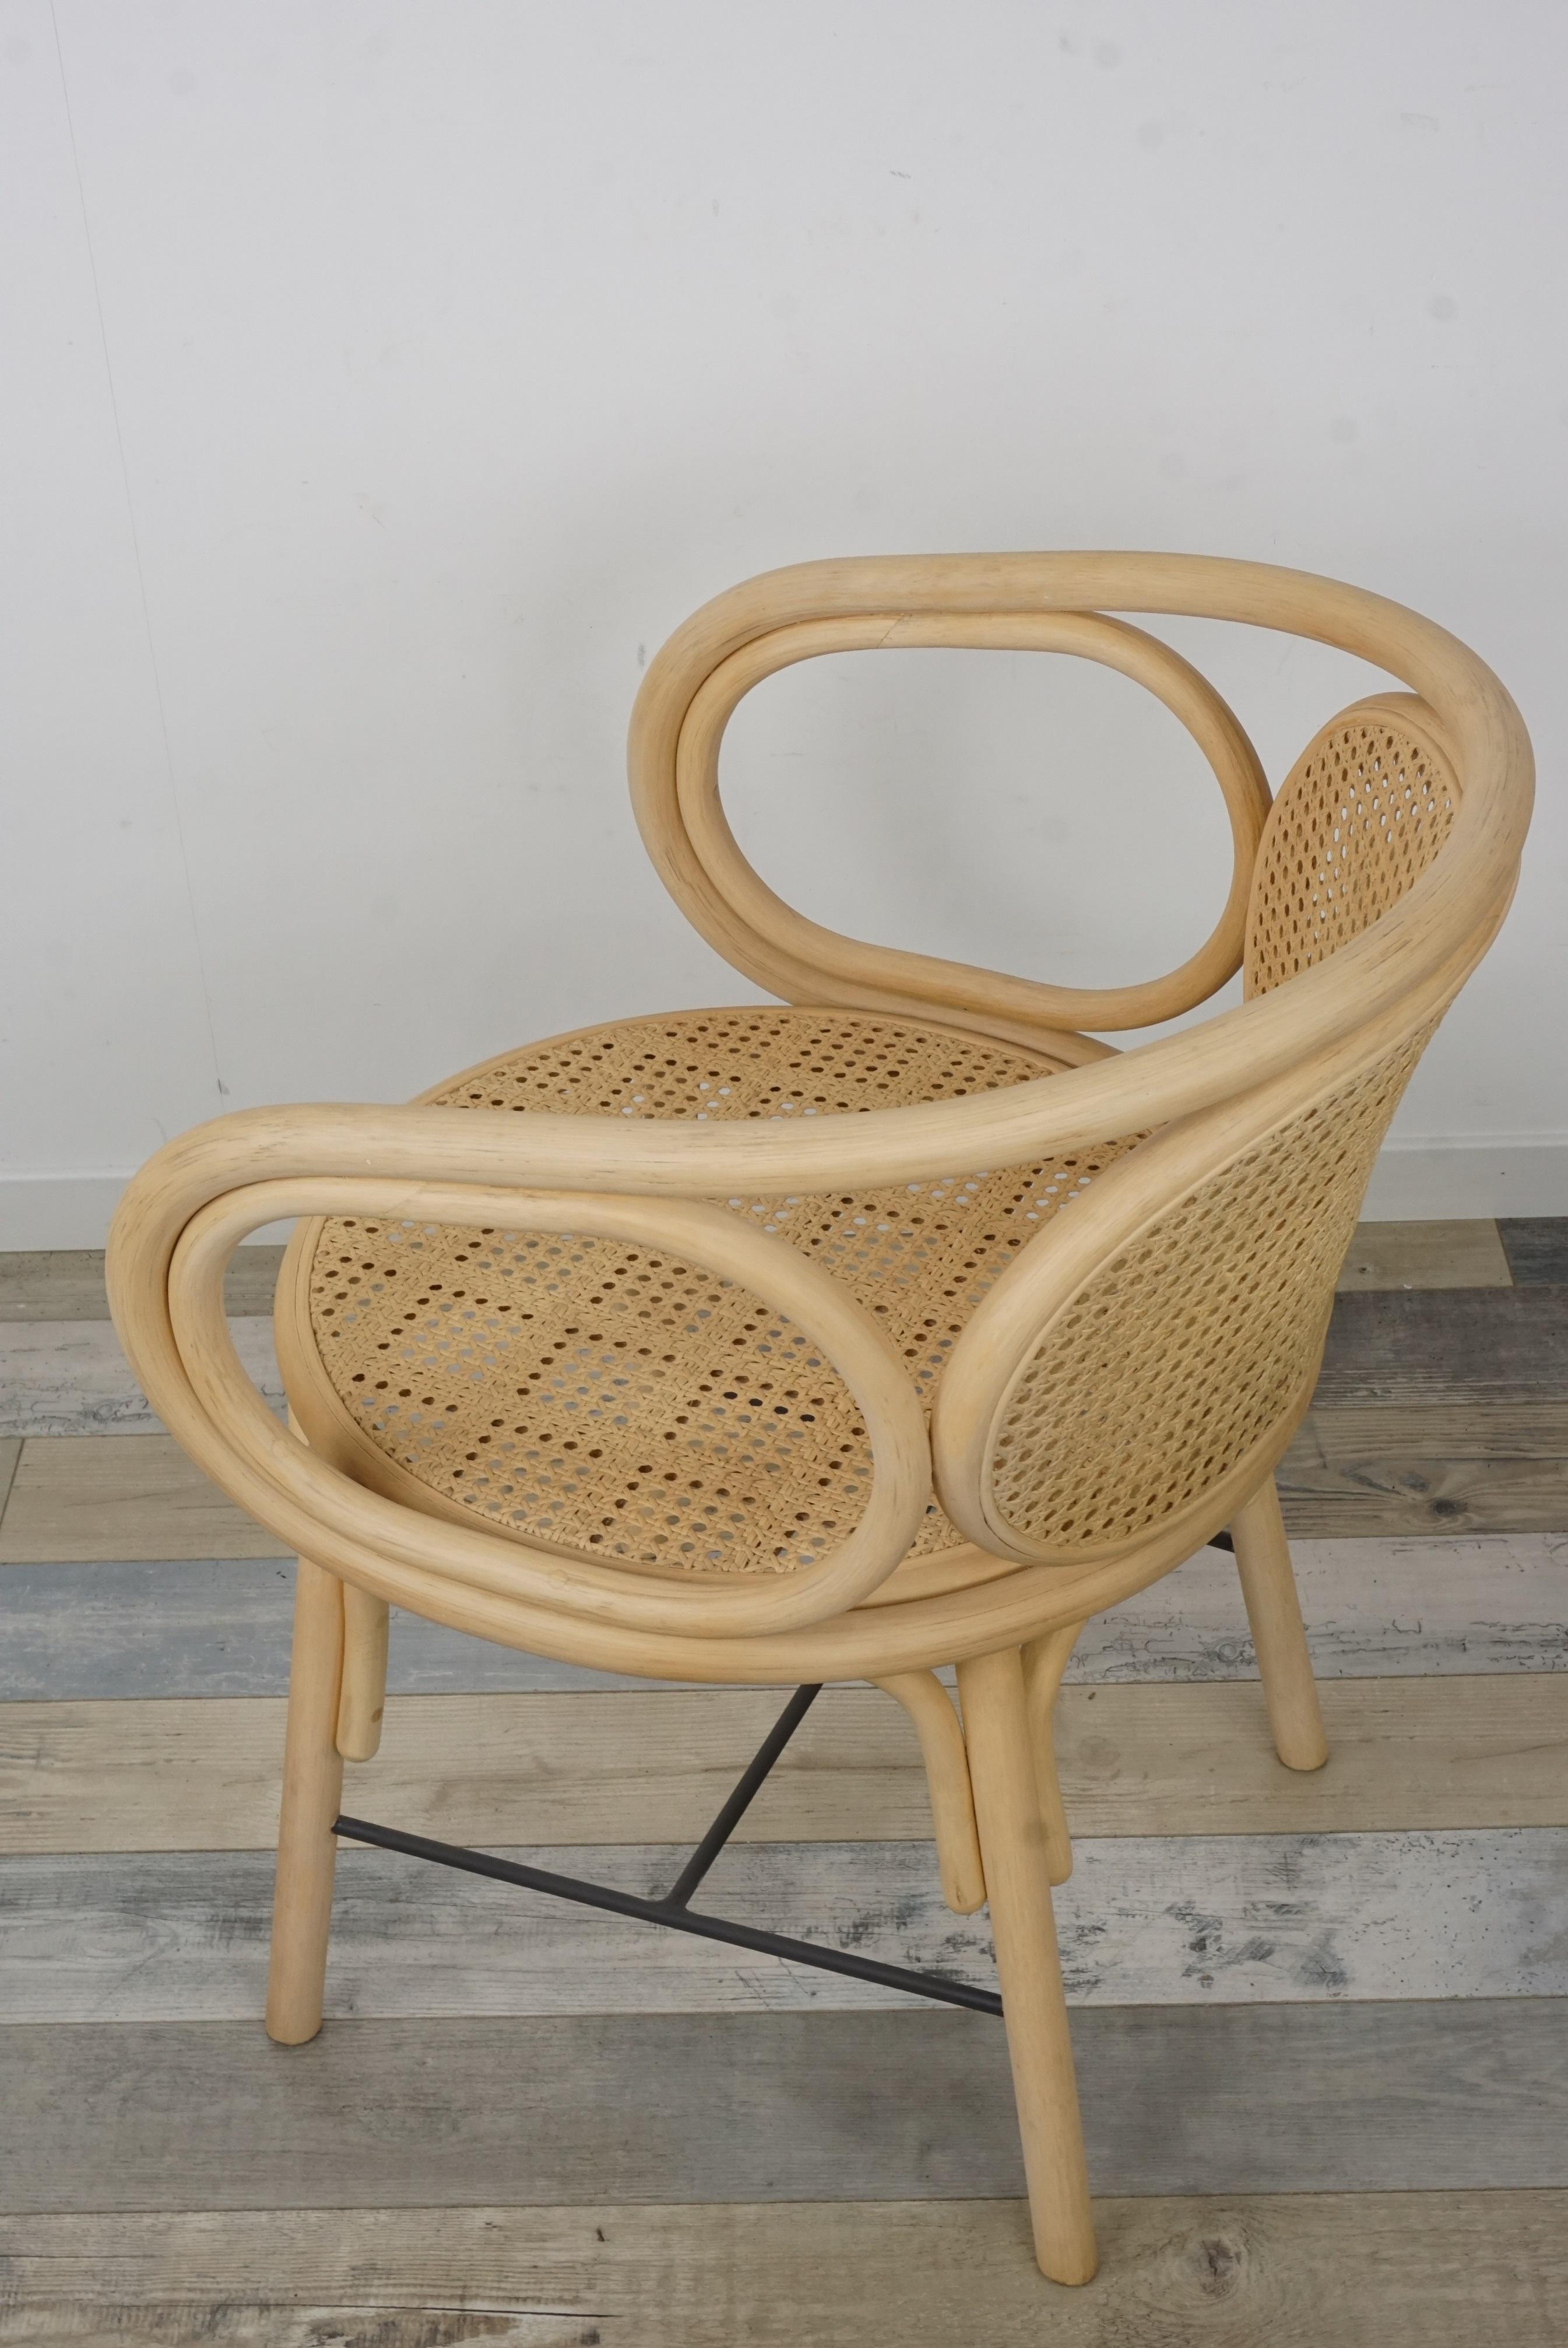 Wicker Rattan and Woven Cane Armchair French Modern Design